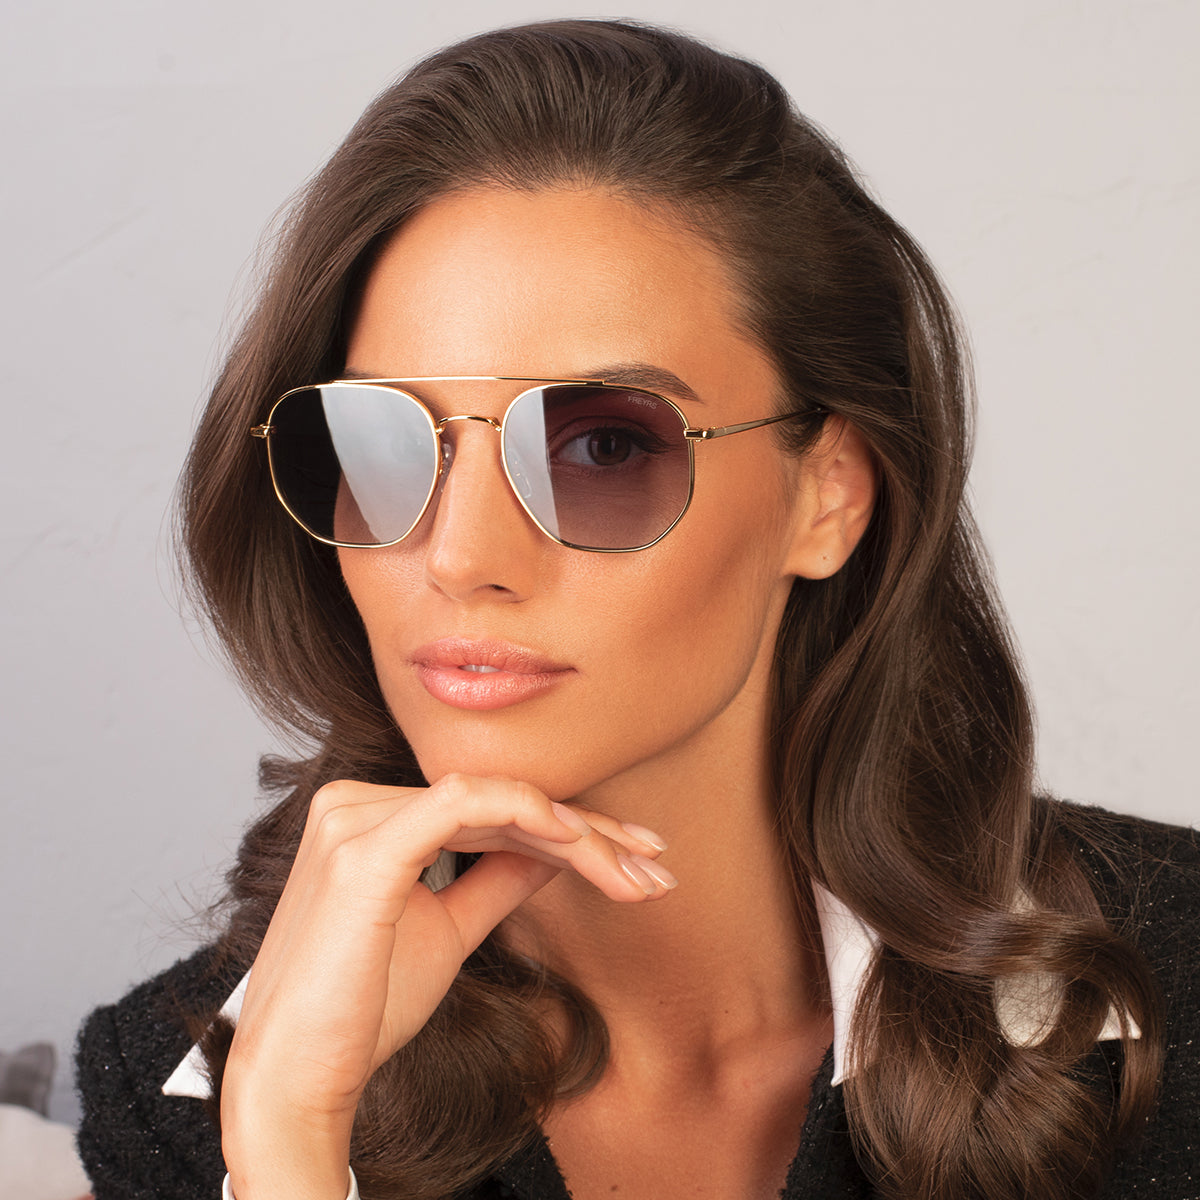 Discover more than 265 modern sunglasses for women